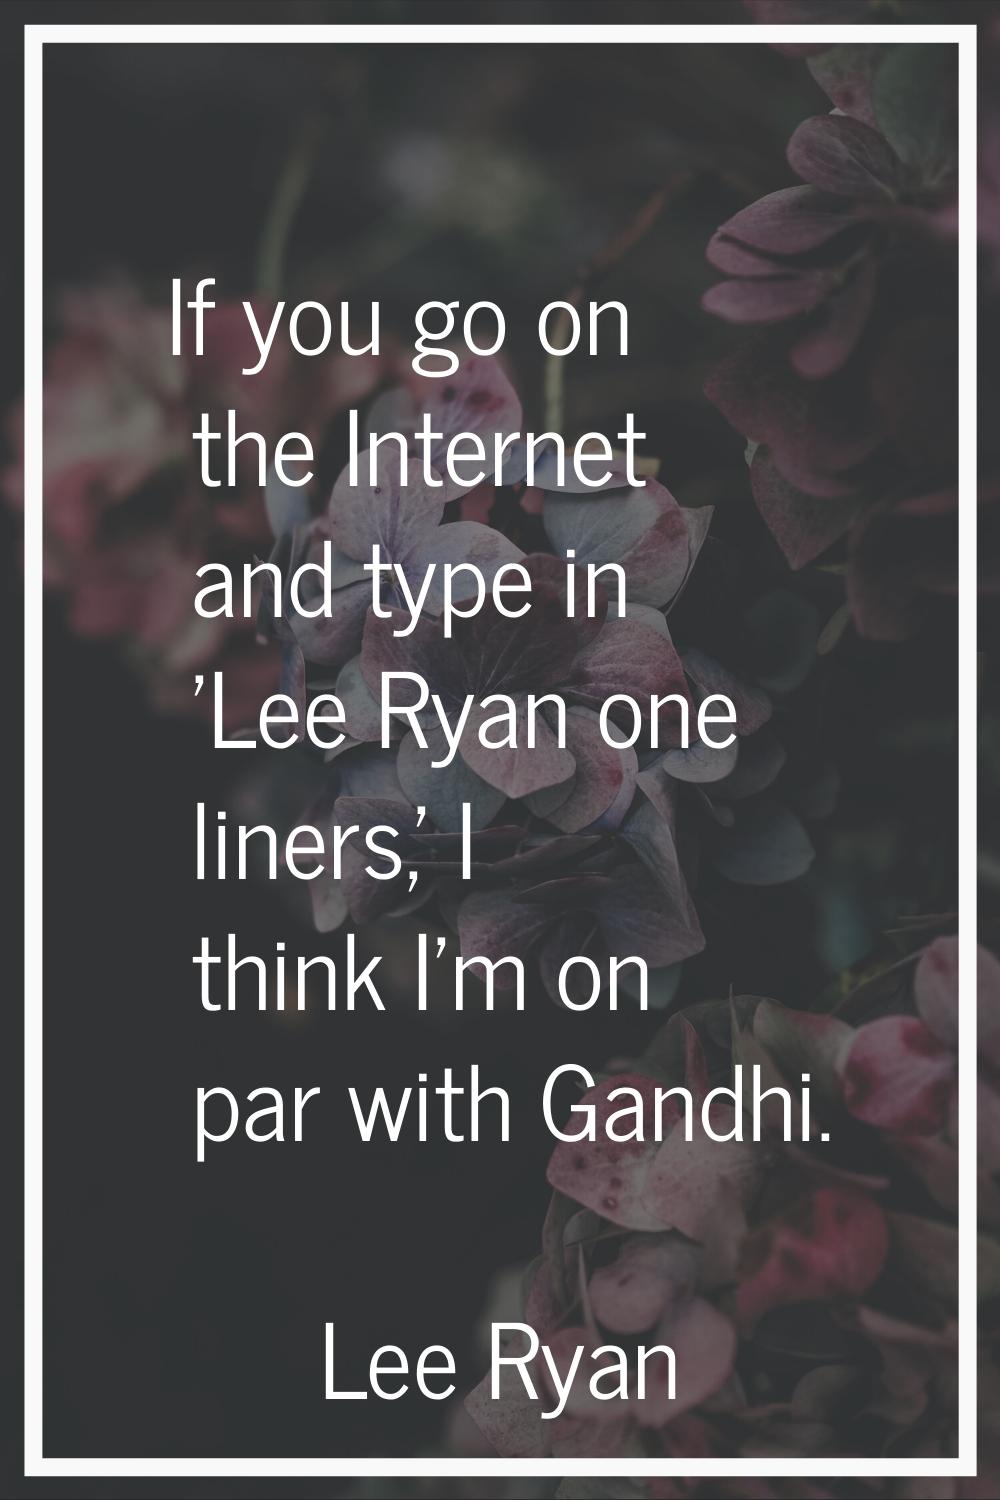 If you go on the Internet and type in 'Lee Ryan one liners,' I think I'm on par with Gandhi.